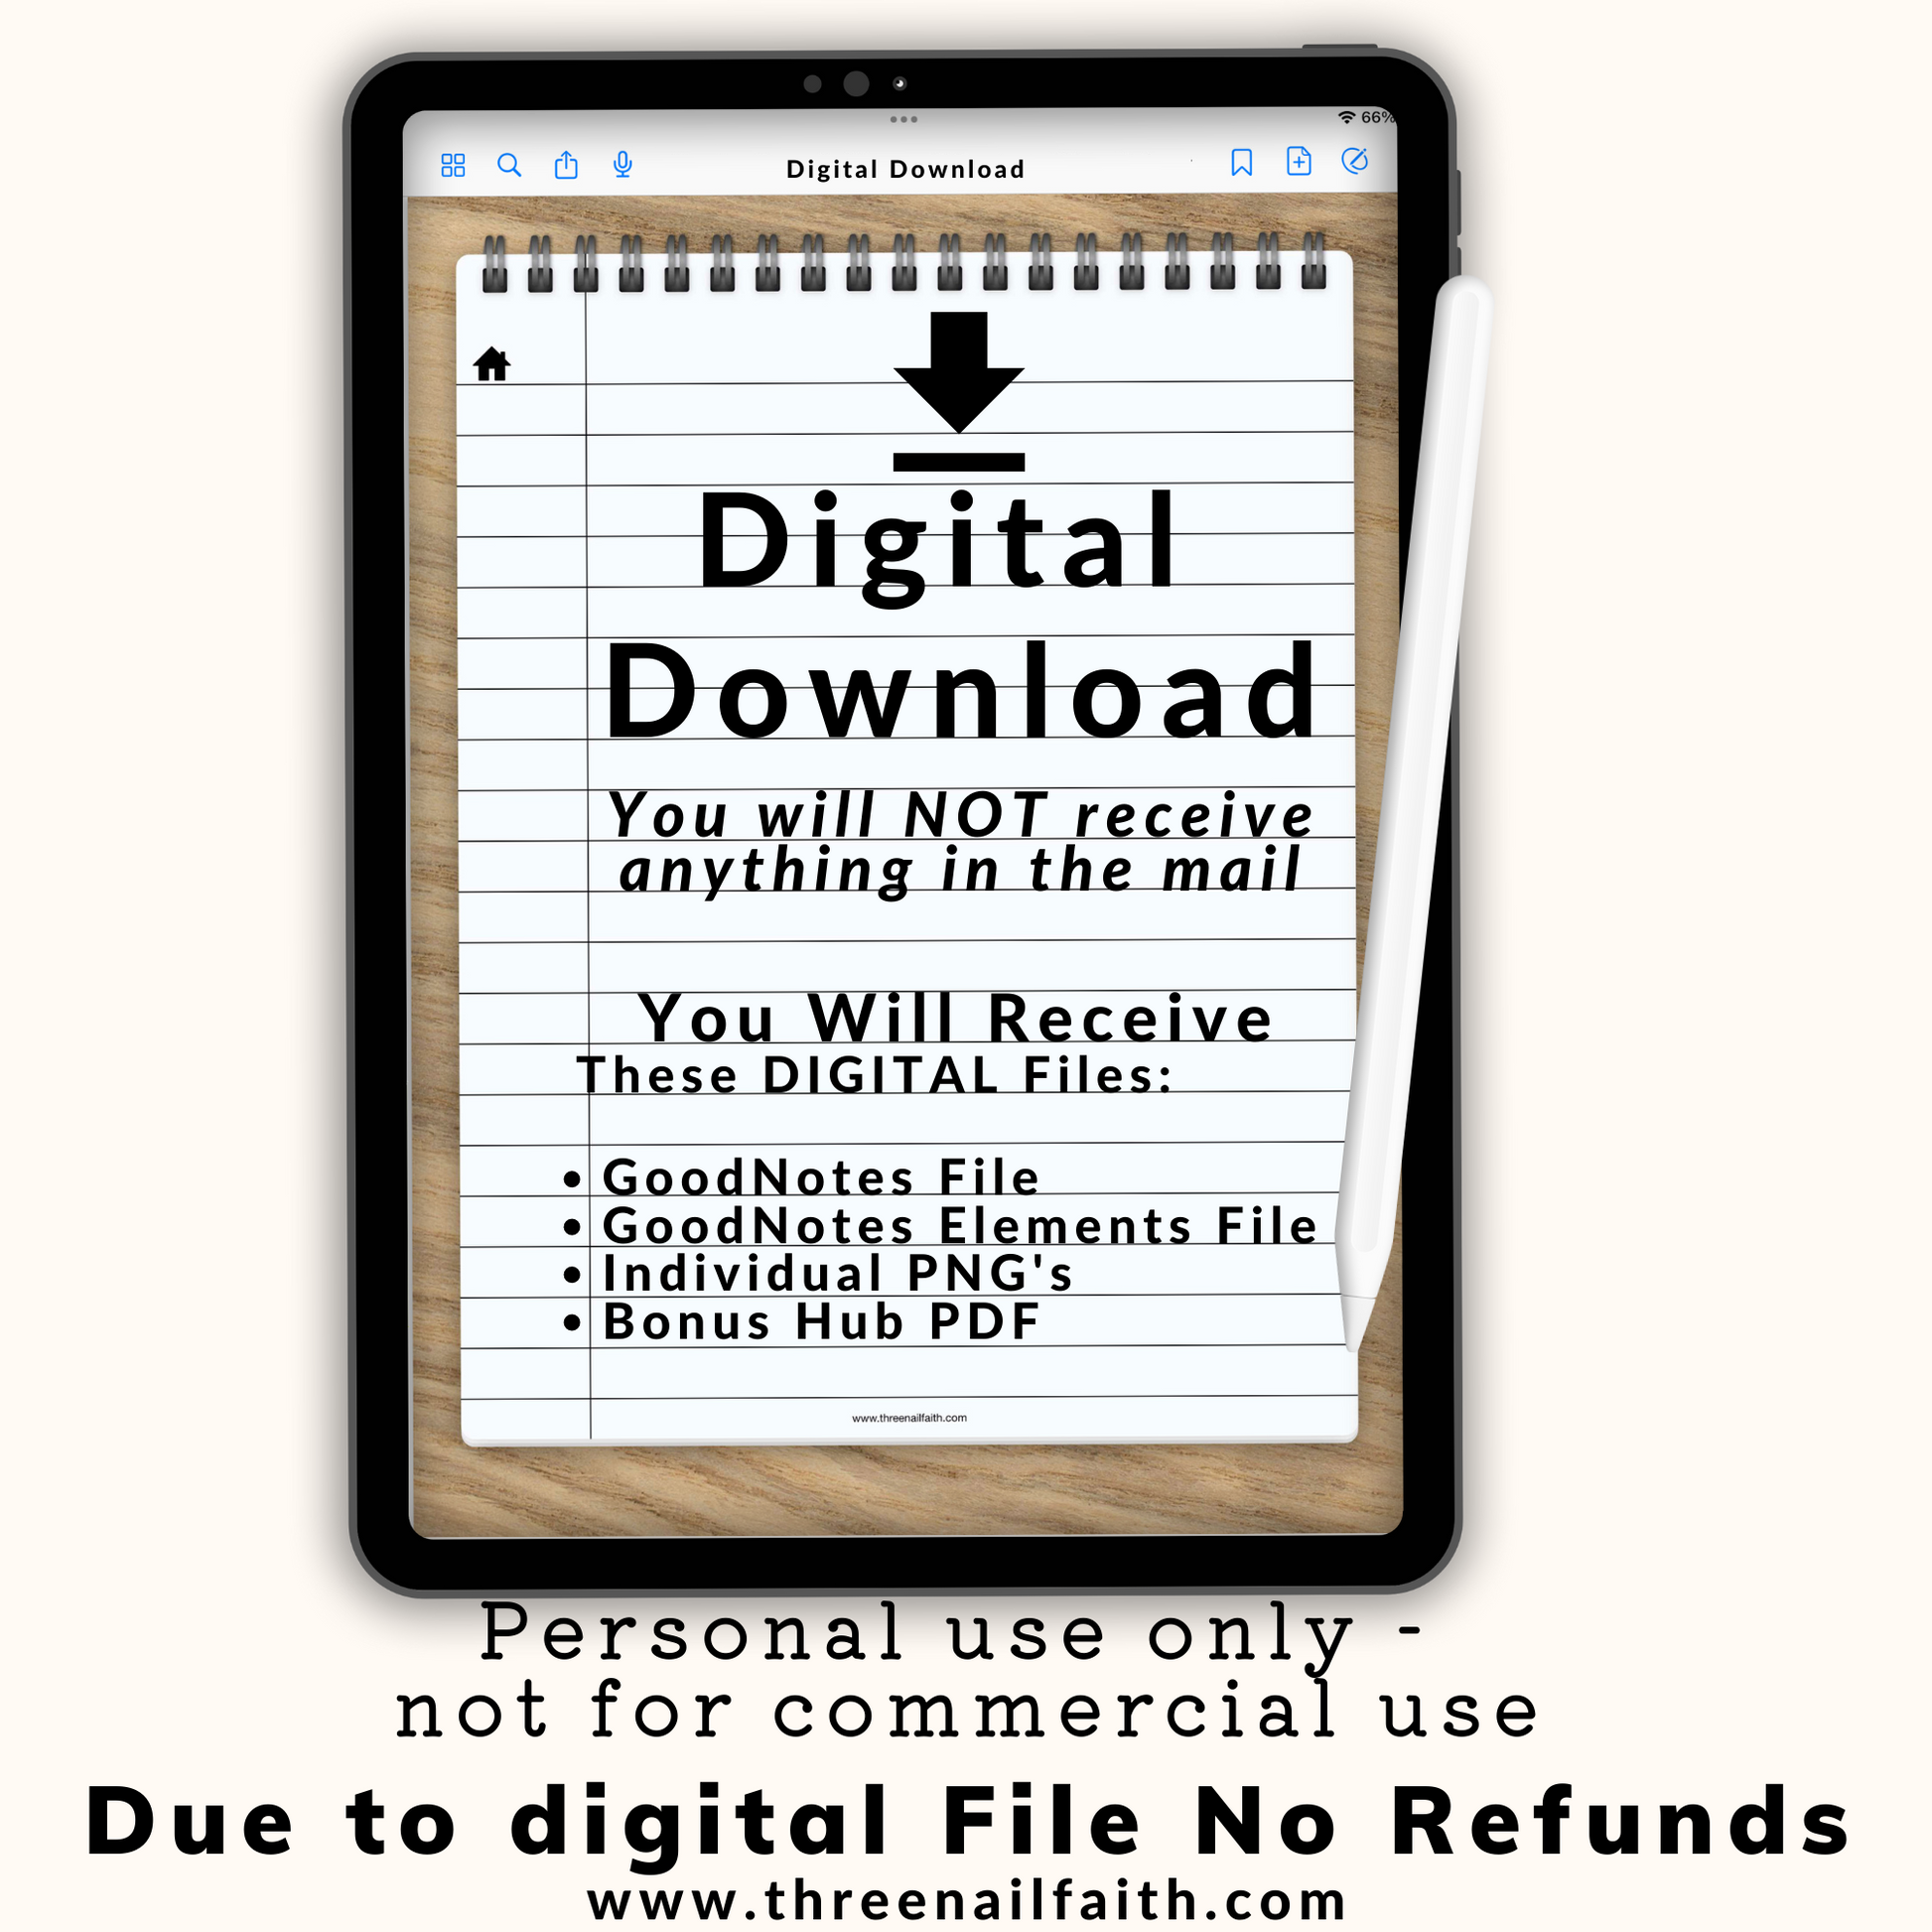 Digital download Nothing will be shipped to you. Files that you will receive Goodnotes, Individual PNGs, Bonus hub link